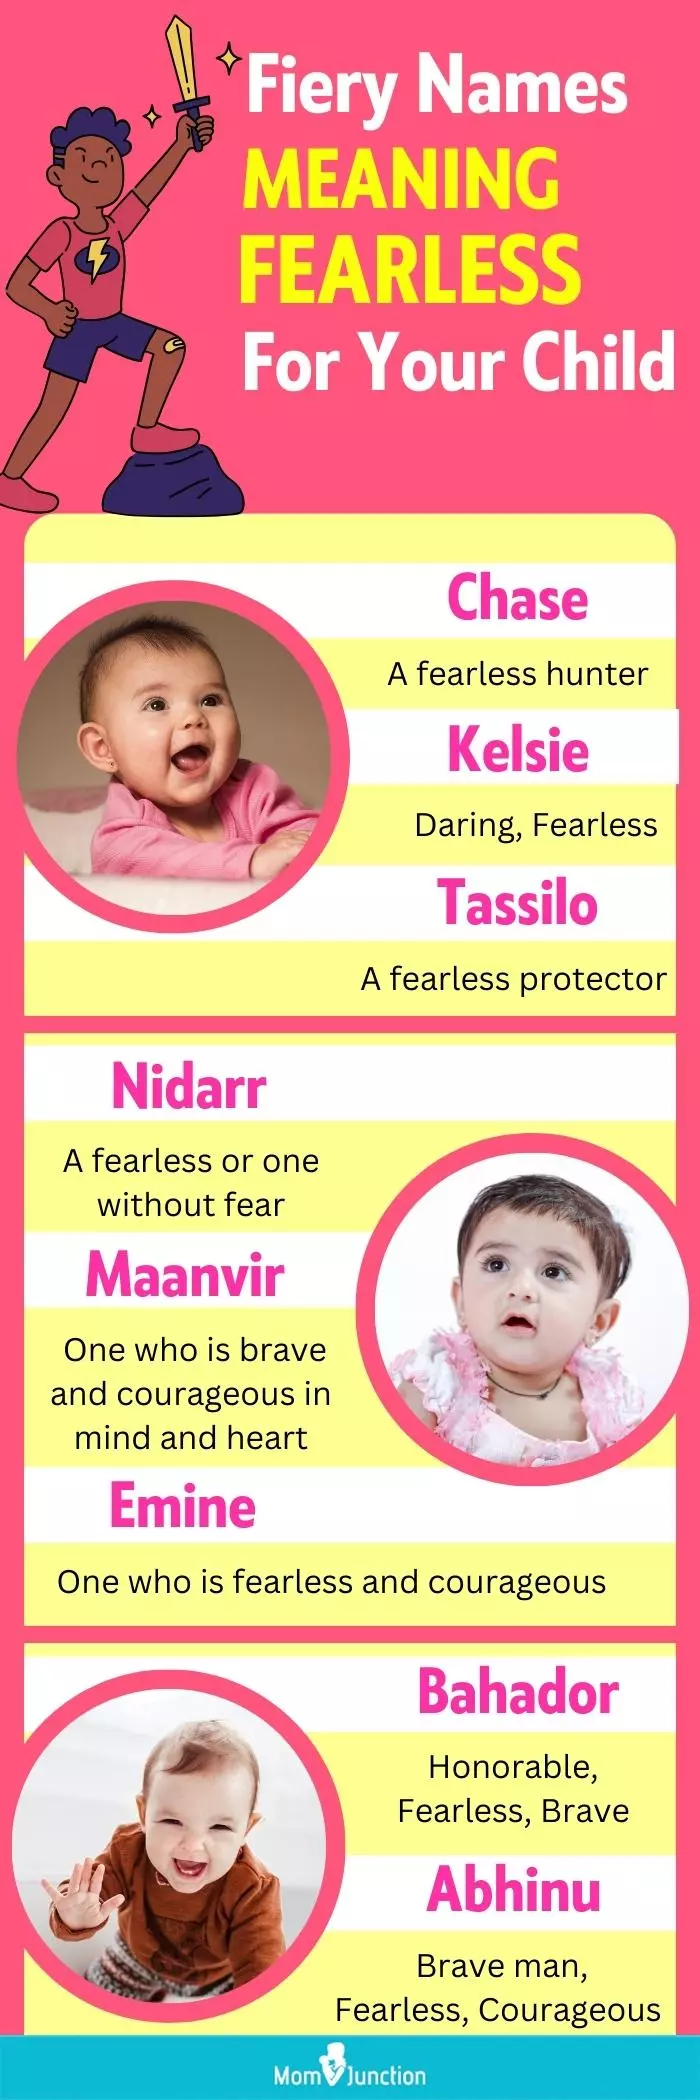 fiery names meaning fearless for your child (infographic)